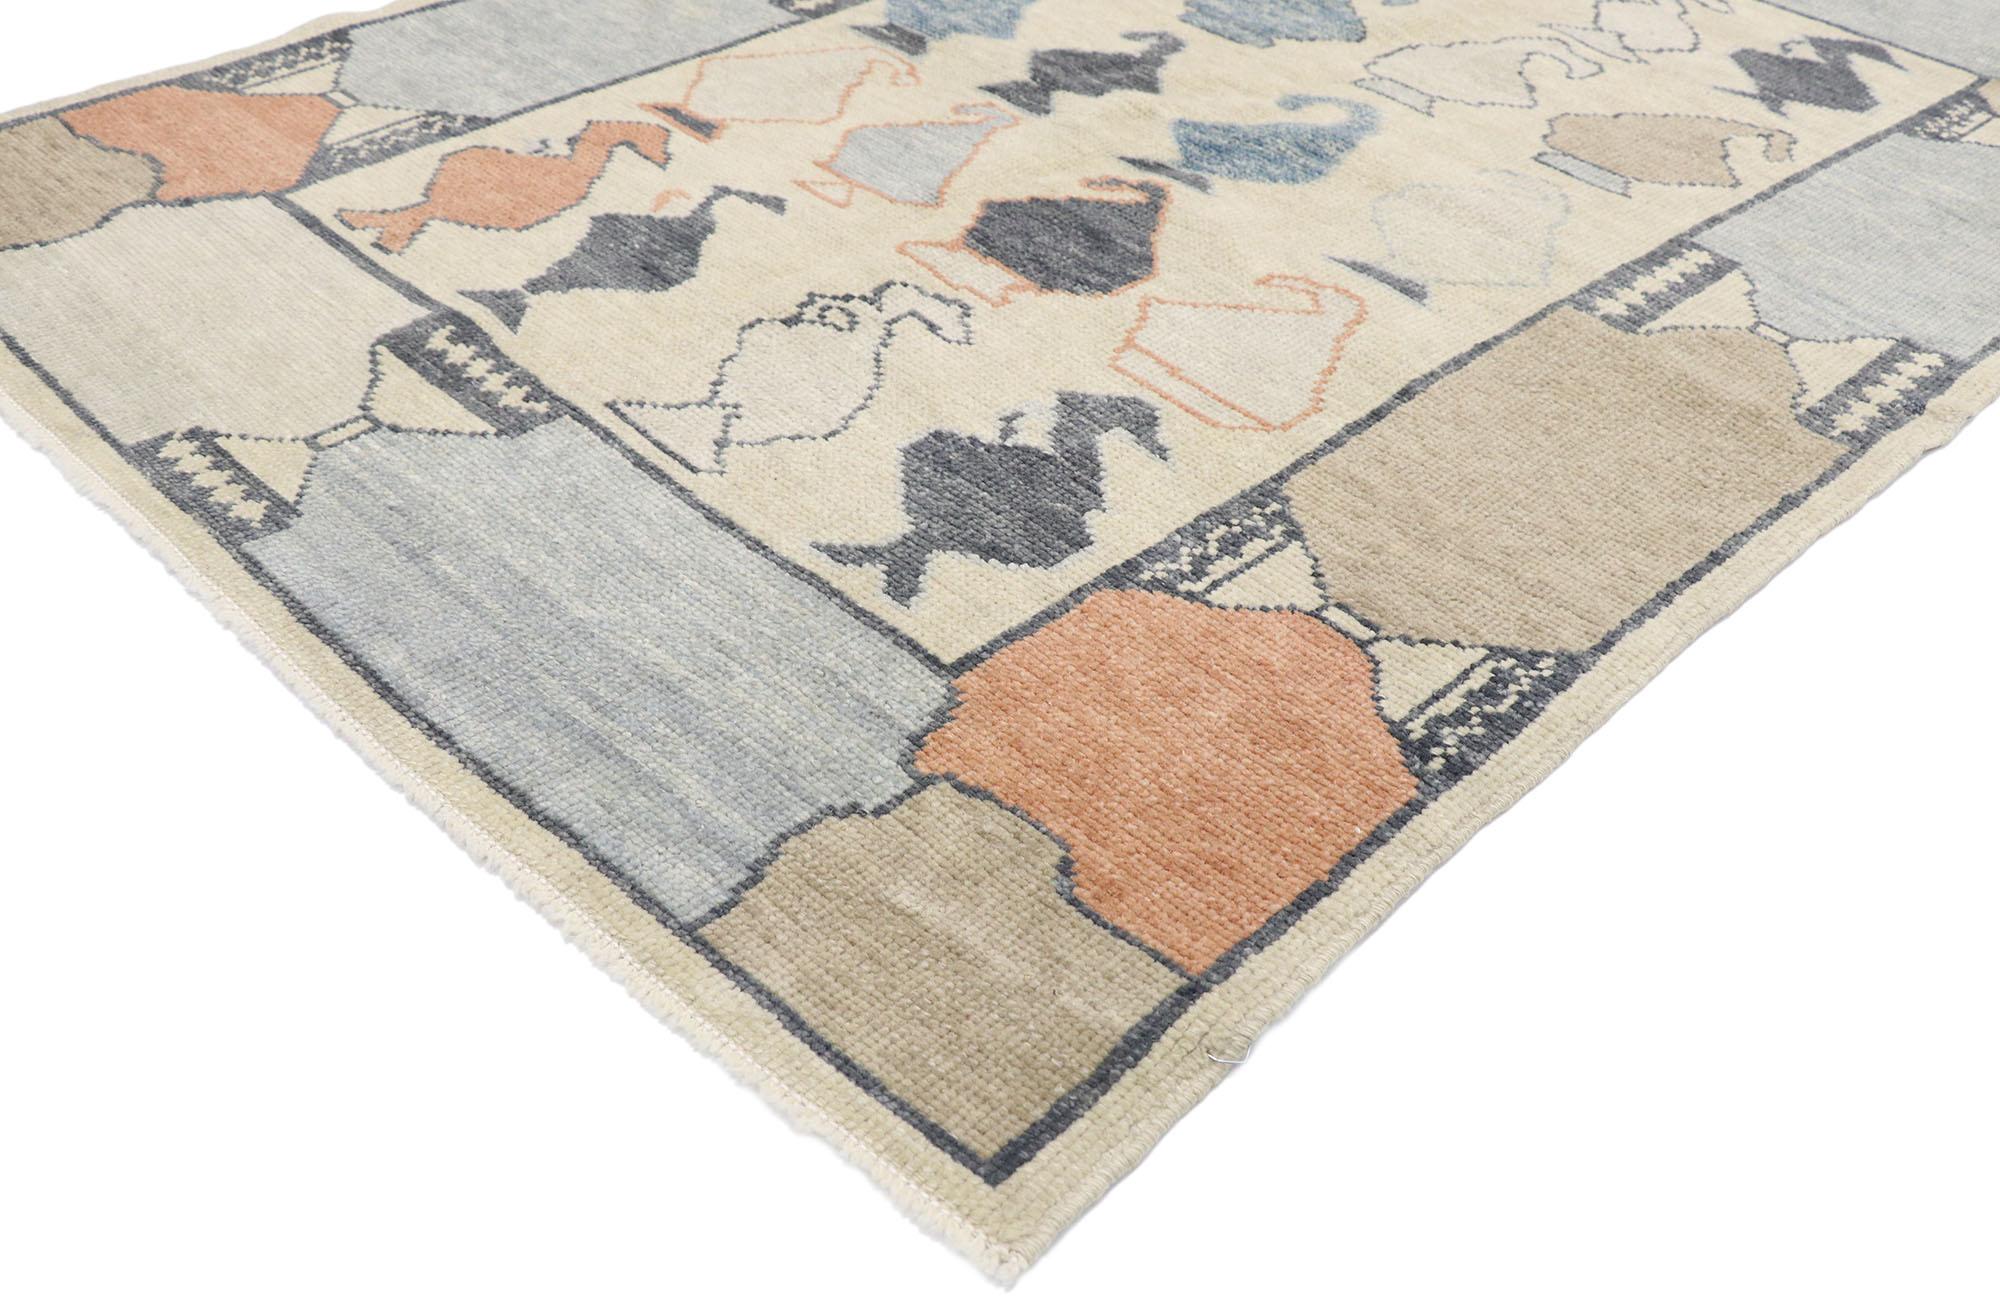 53533 new contemporary Turkish oushak rug with Modern style 04'03 x 06'00. With neutral hues and modern style, this hand knotted wool contemporary Turkish Oushak rug features an all-over geometric pattern comprised of ewers (or jugs) symbolizing